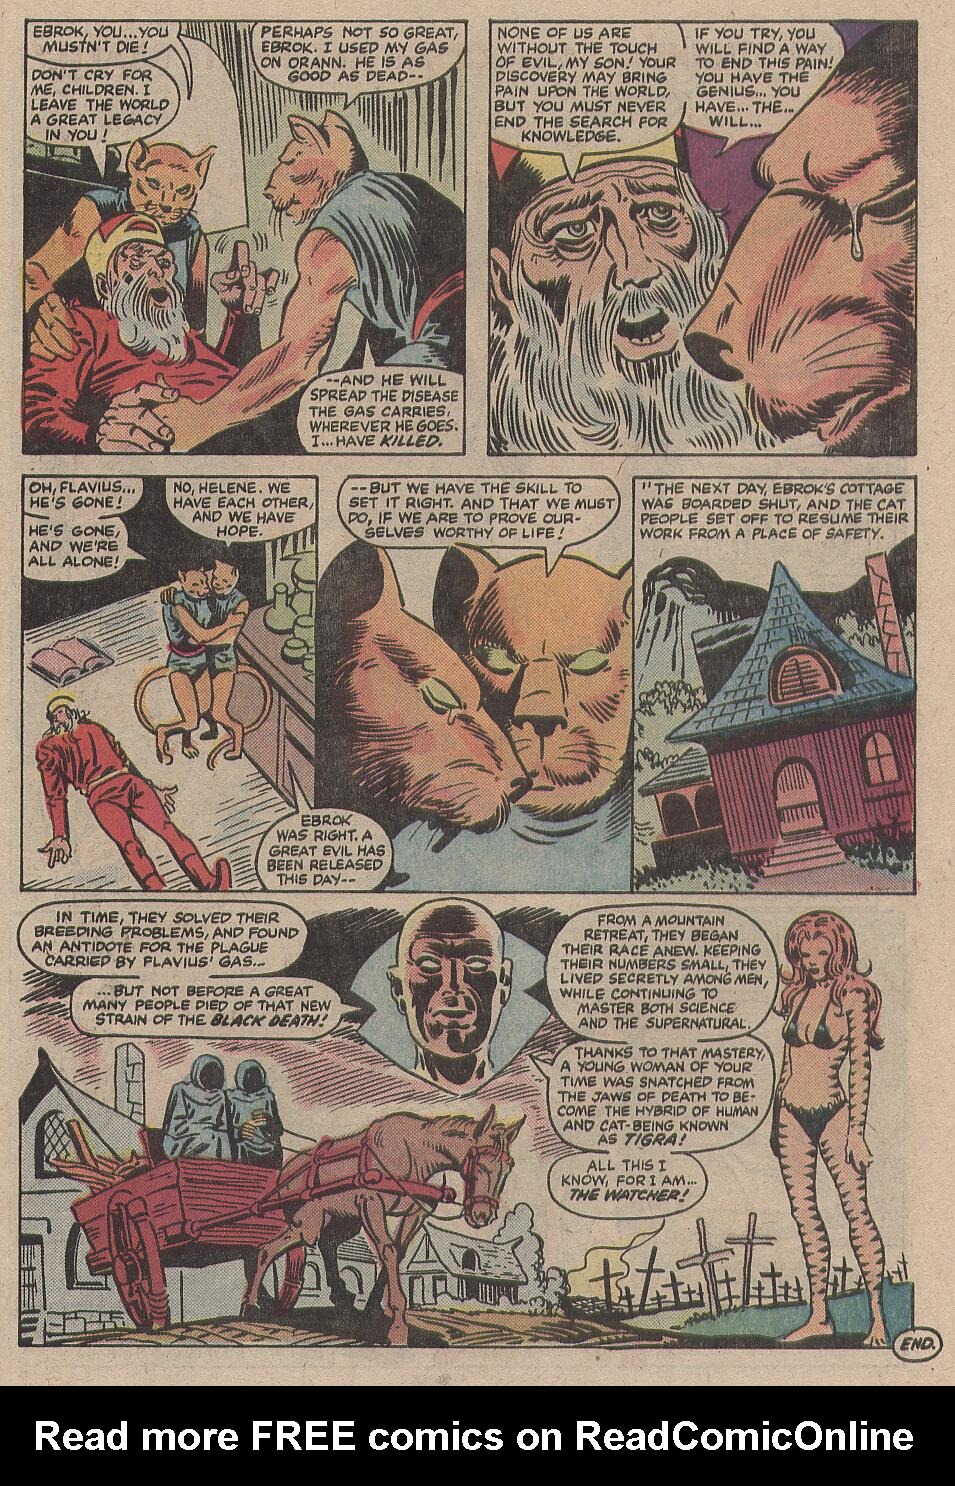 What If? (1977) issue 35 - Elektra had lived - Page 25